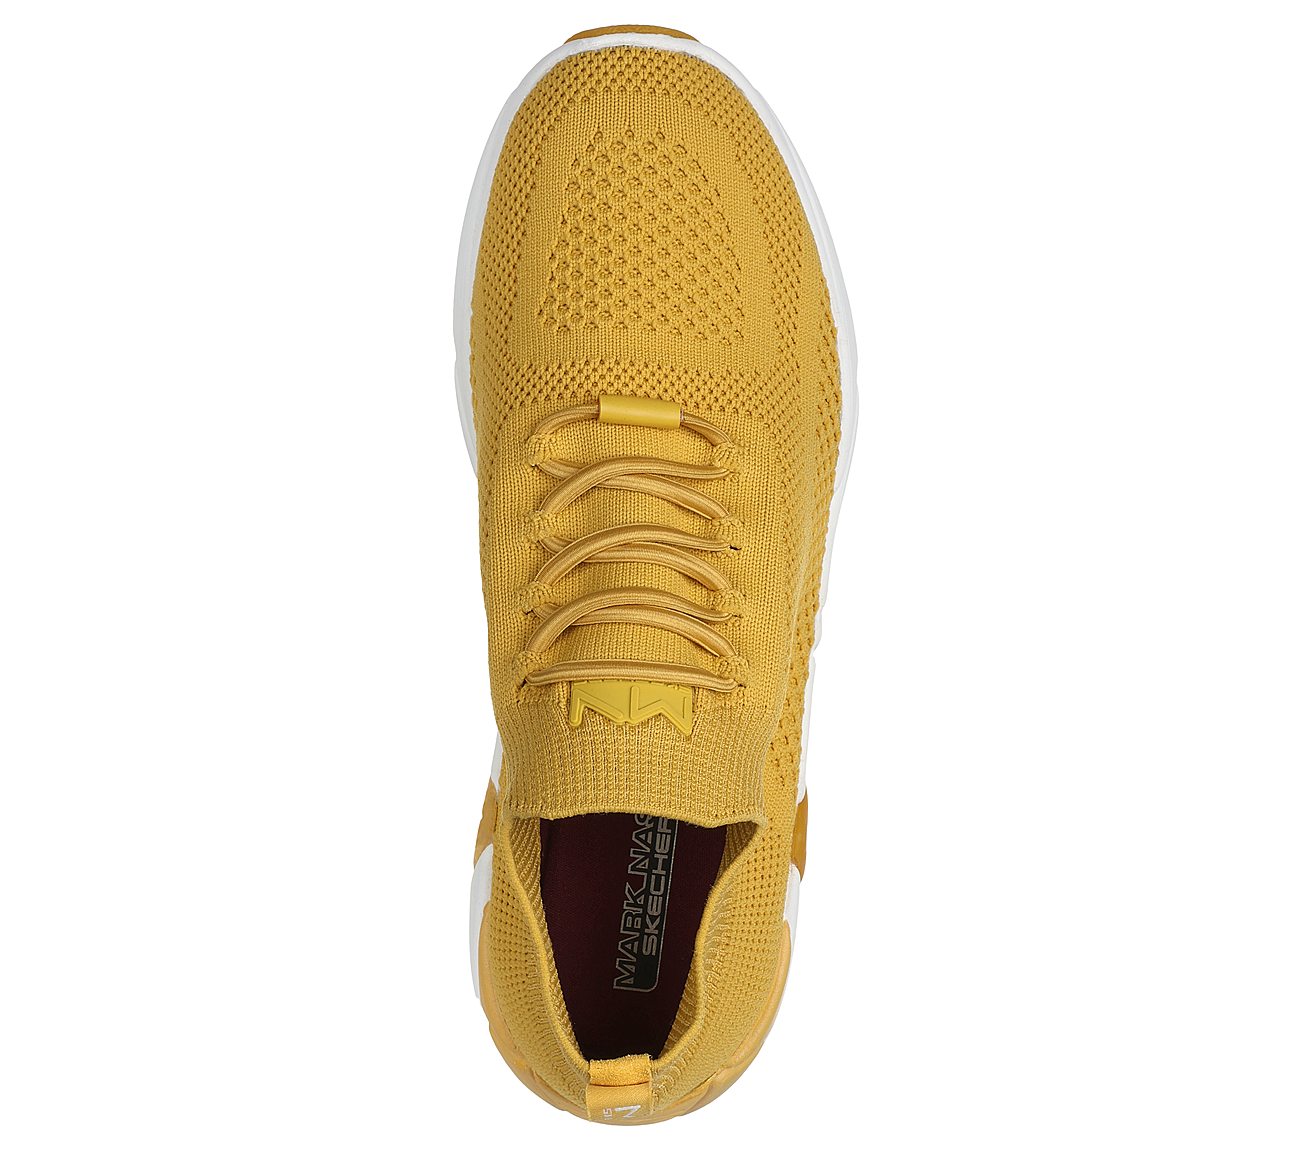 A-LINE - RIDER, YELLOW Footwear Top View